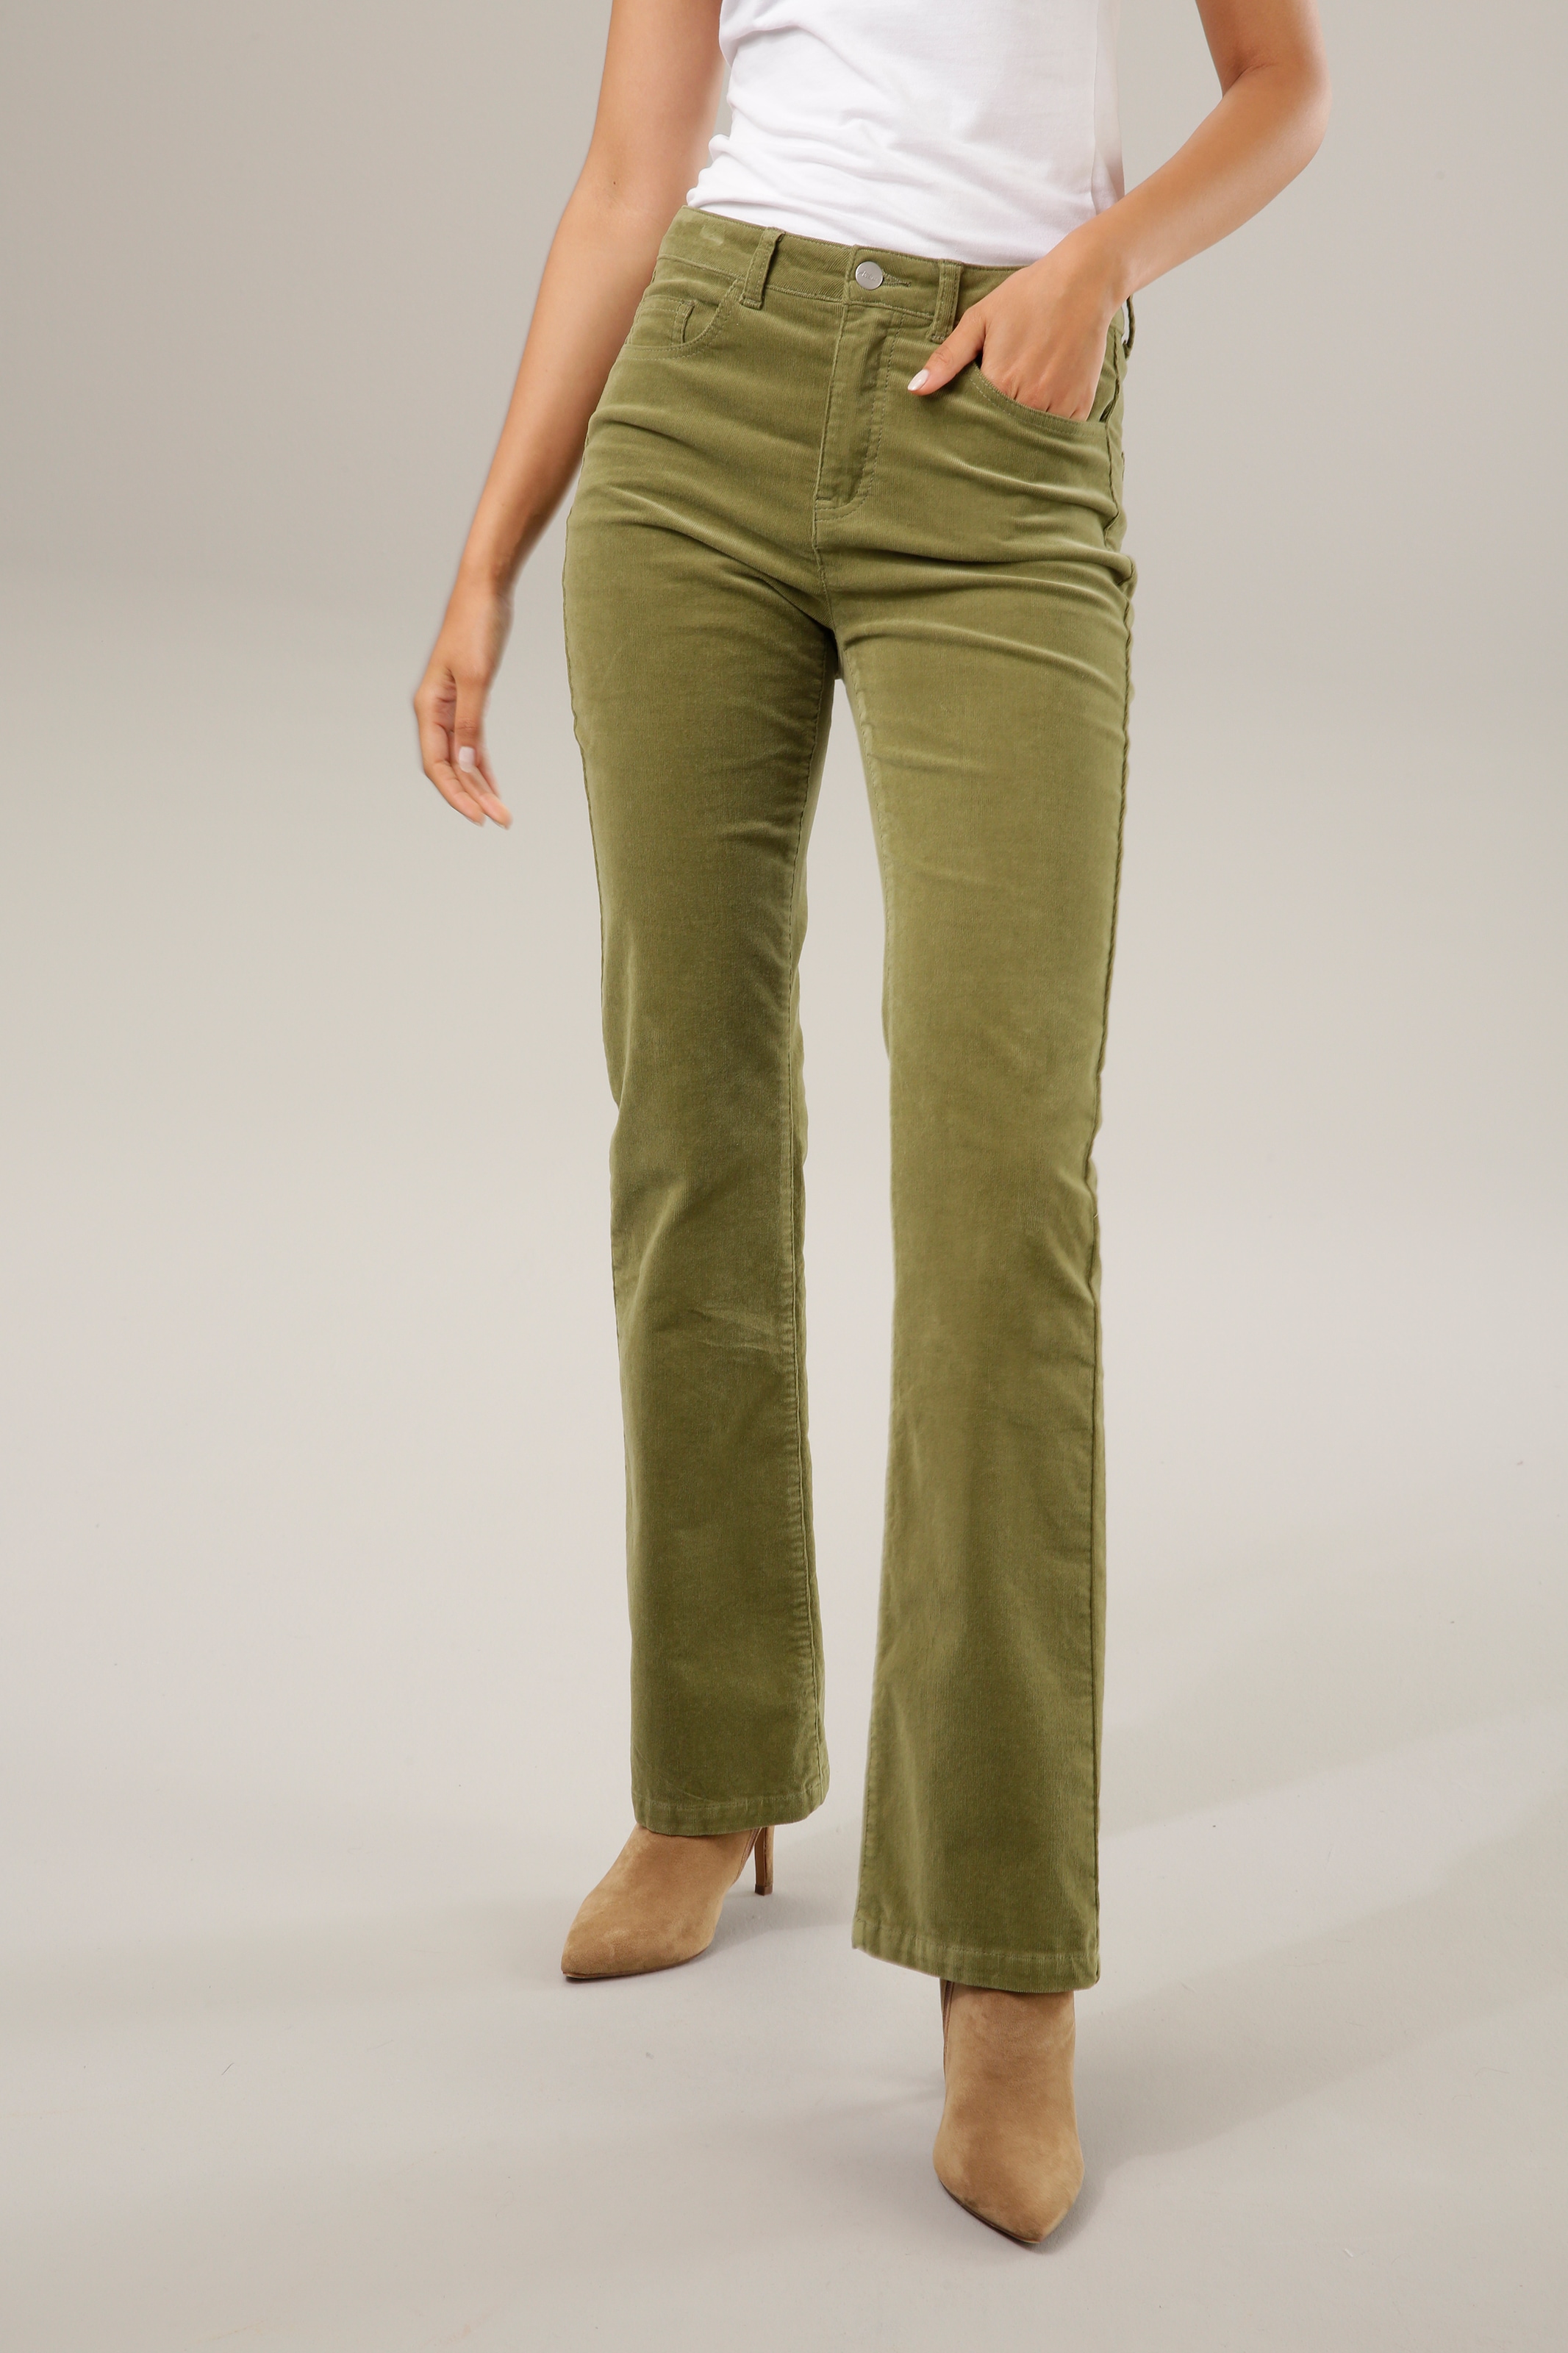 Aniston CASUAL Cordhose, in trendiger Bootcut-Form bei ♕